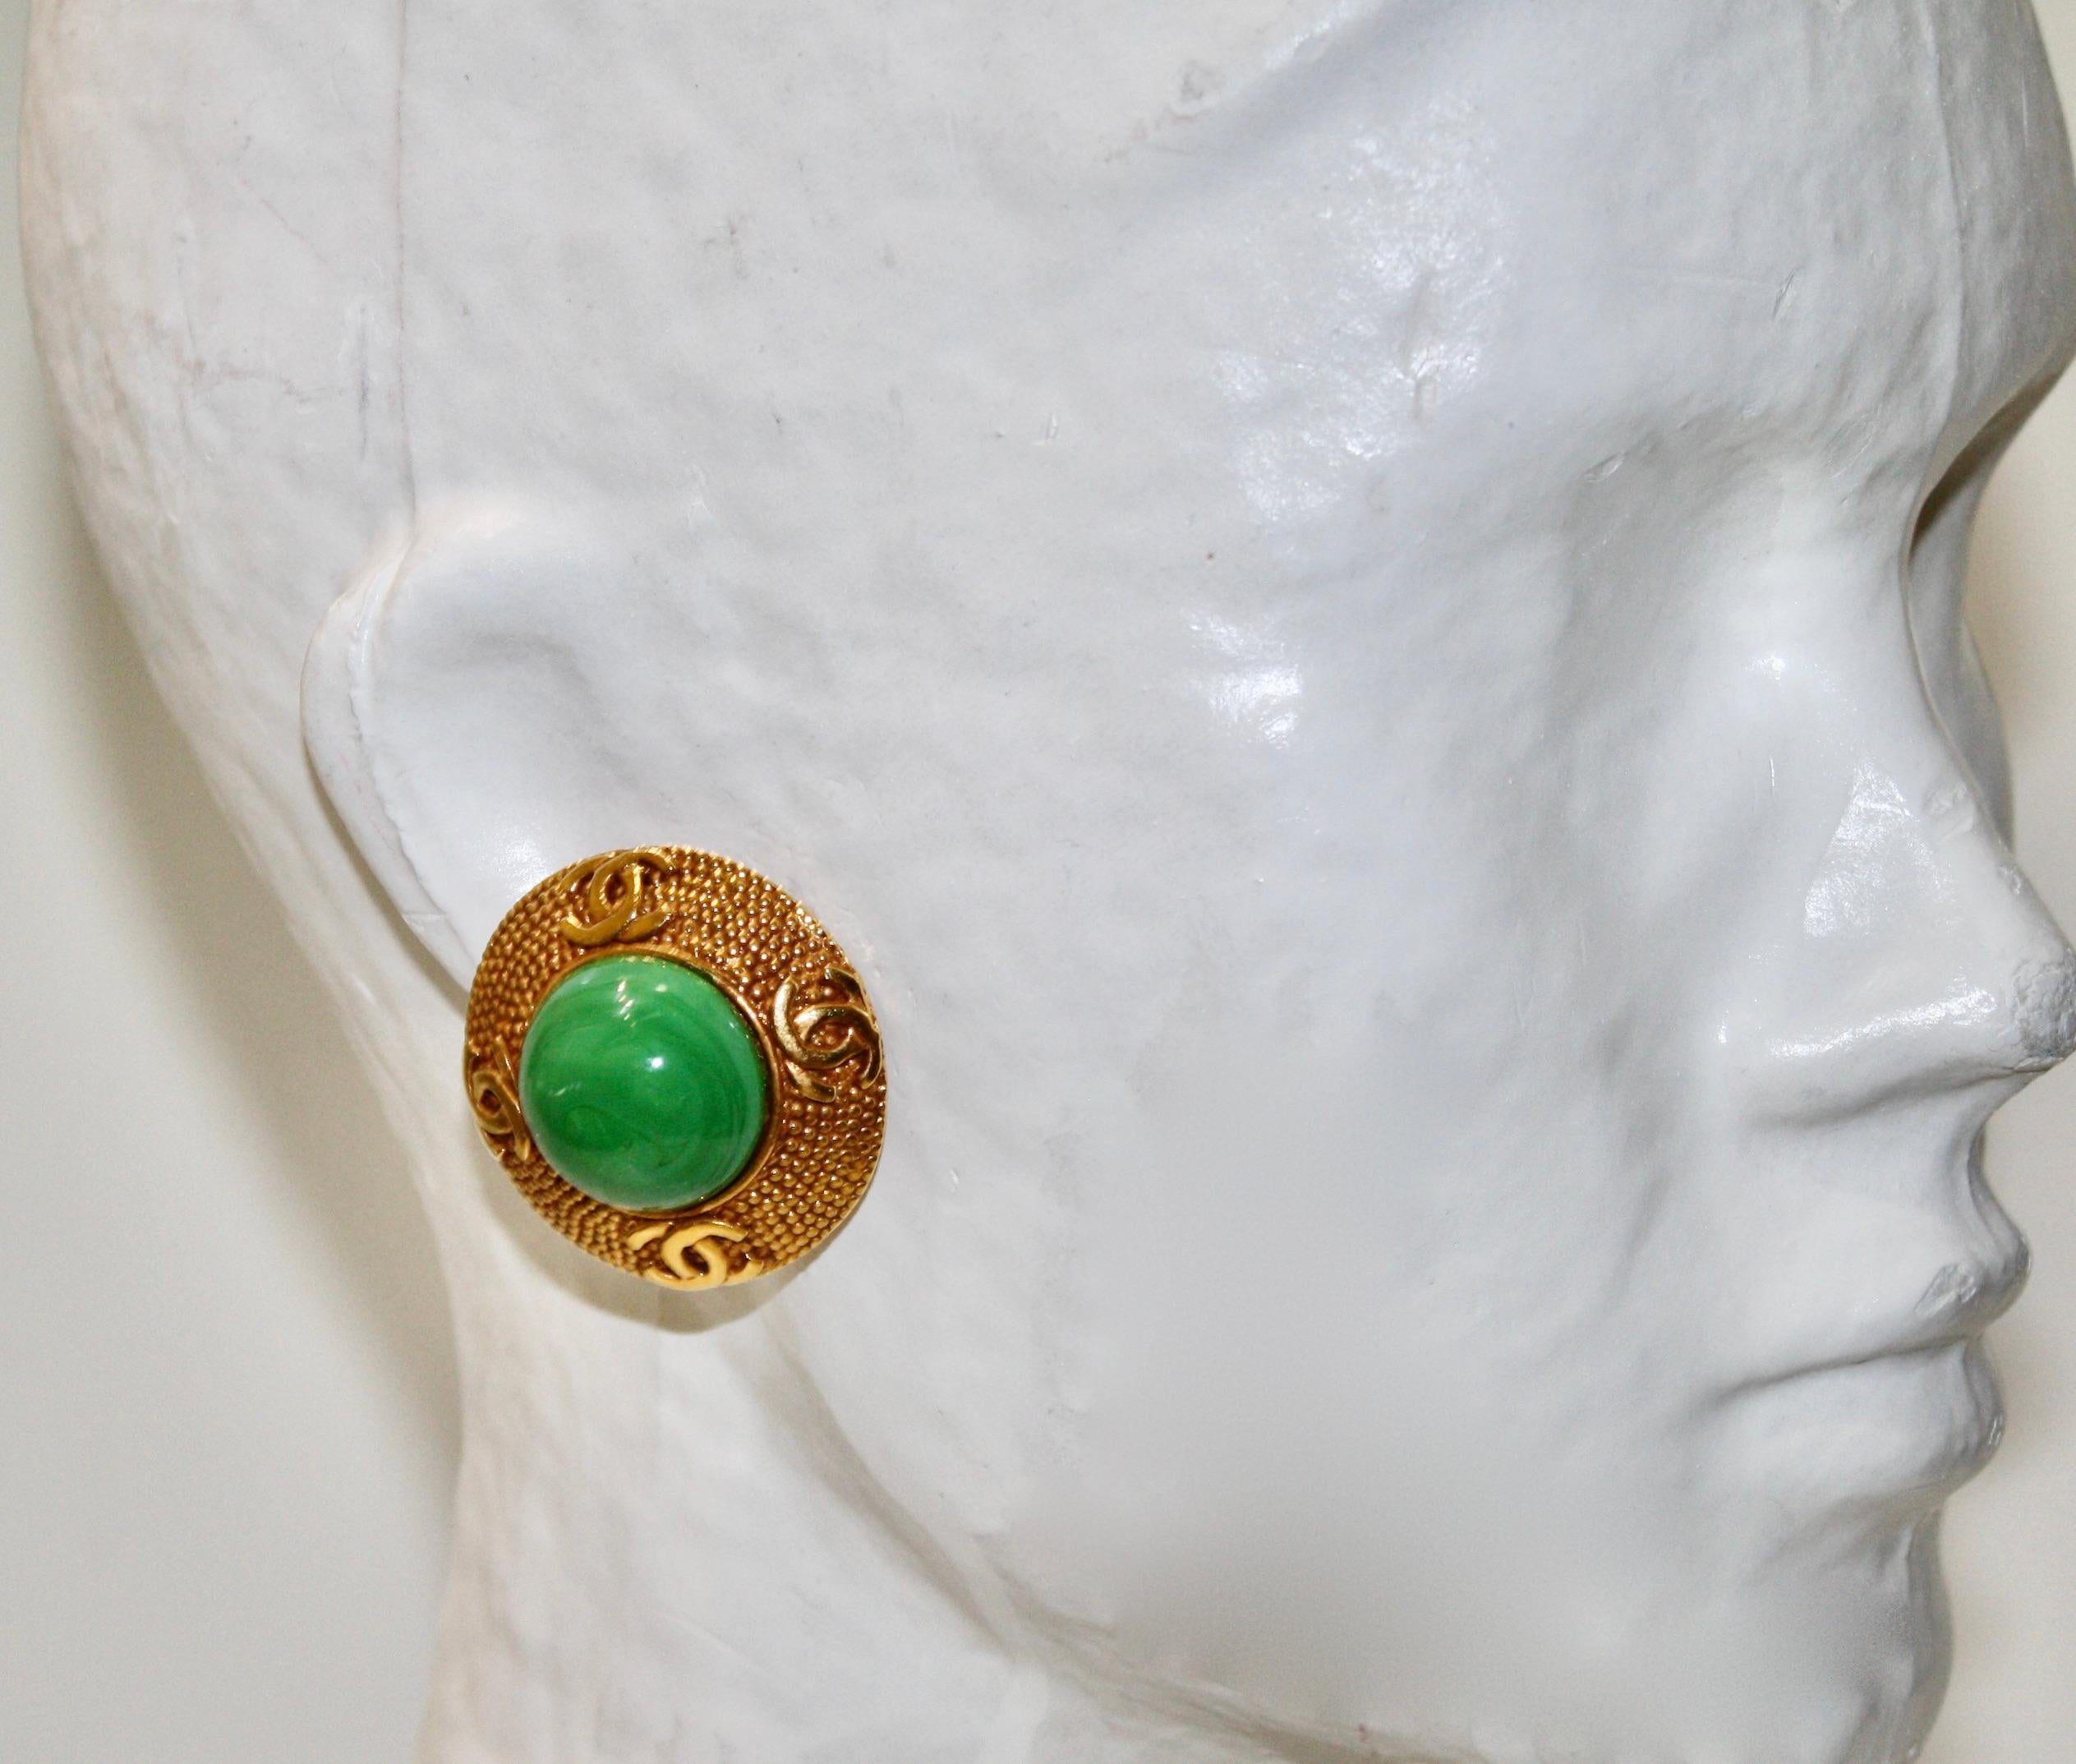 Green  pate de  verre cabochons set on brass with chain motif and cc. Perfect condition.
Clip earrings 